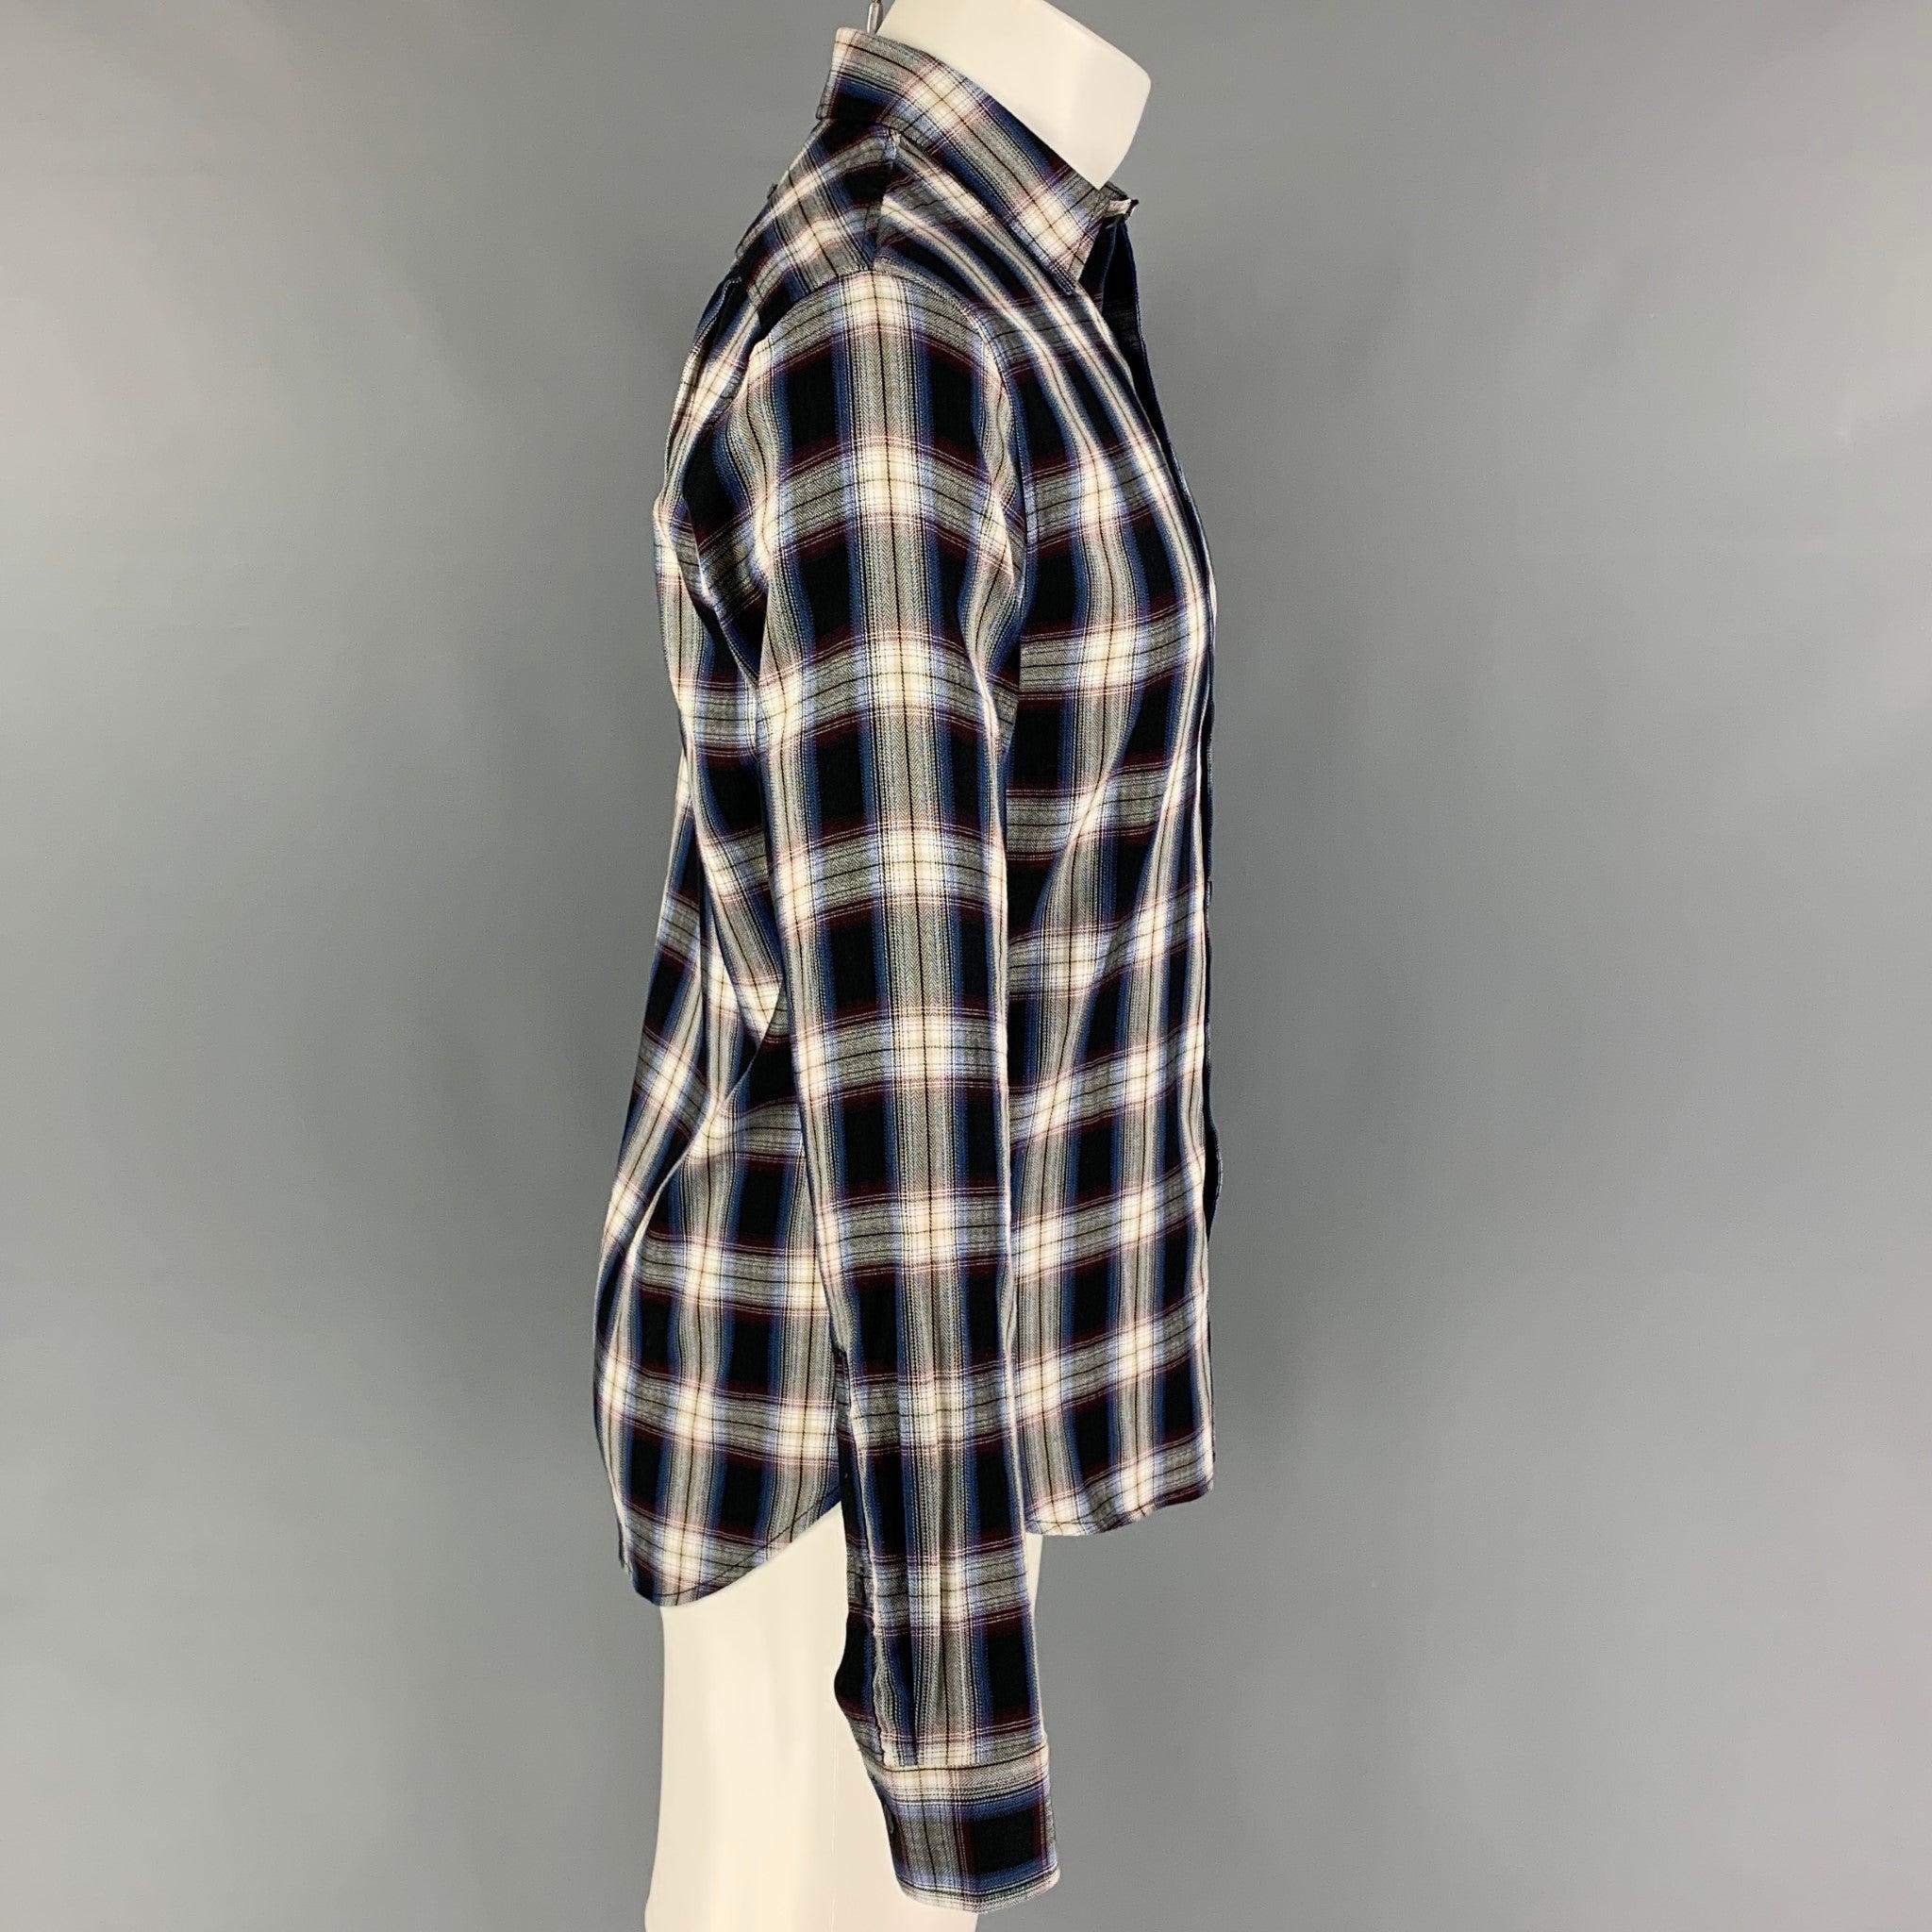 VINCE long sleeve shirt comes in a multi-color plaid cotton featuring a classic fit, spread collar, and a button up closure.
New with tags.
 

Marked:   XS 

Measurements: 
 
Shoulder:
17.5 inches Chest: 38 inches Sleeve: 26 inches Length: 29 inches